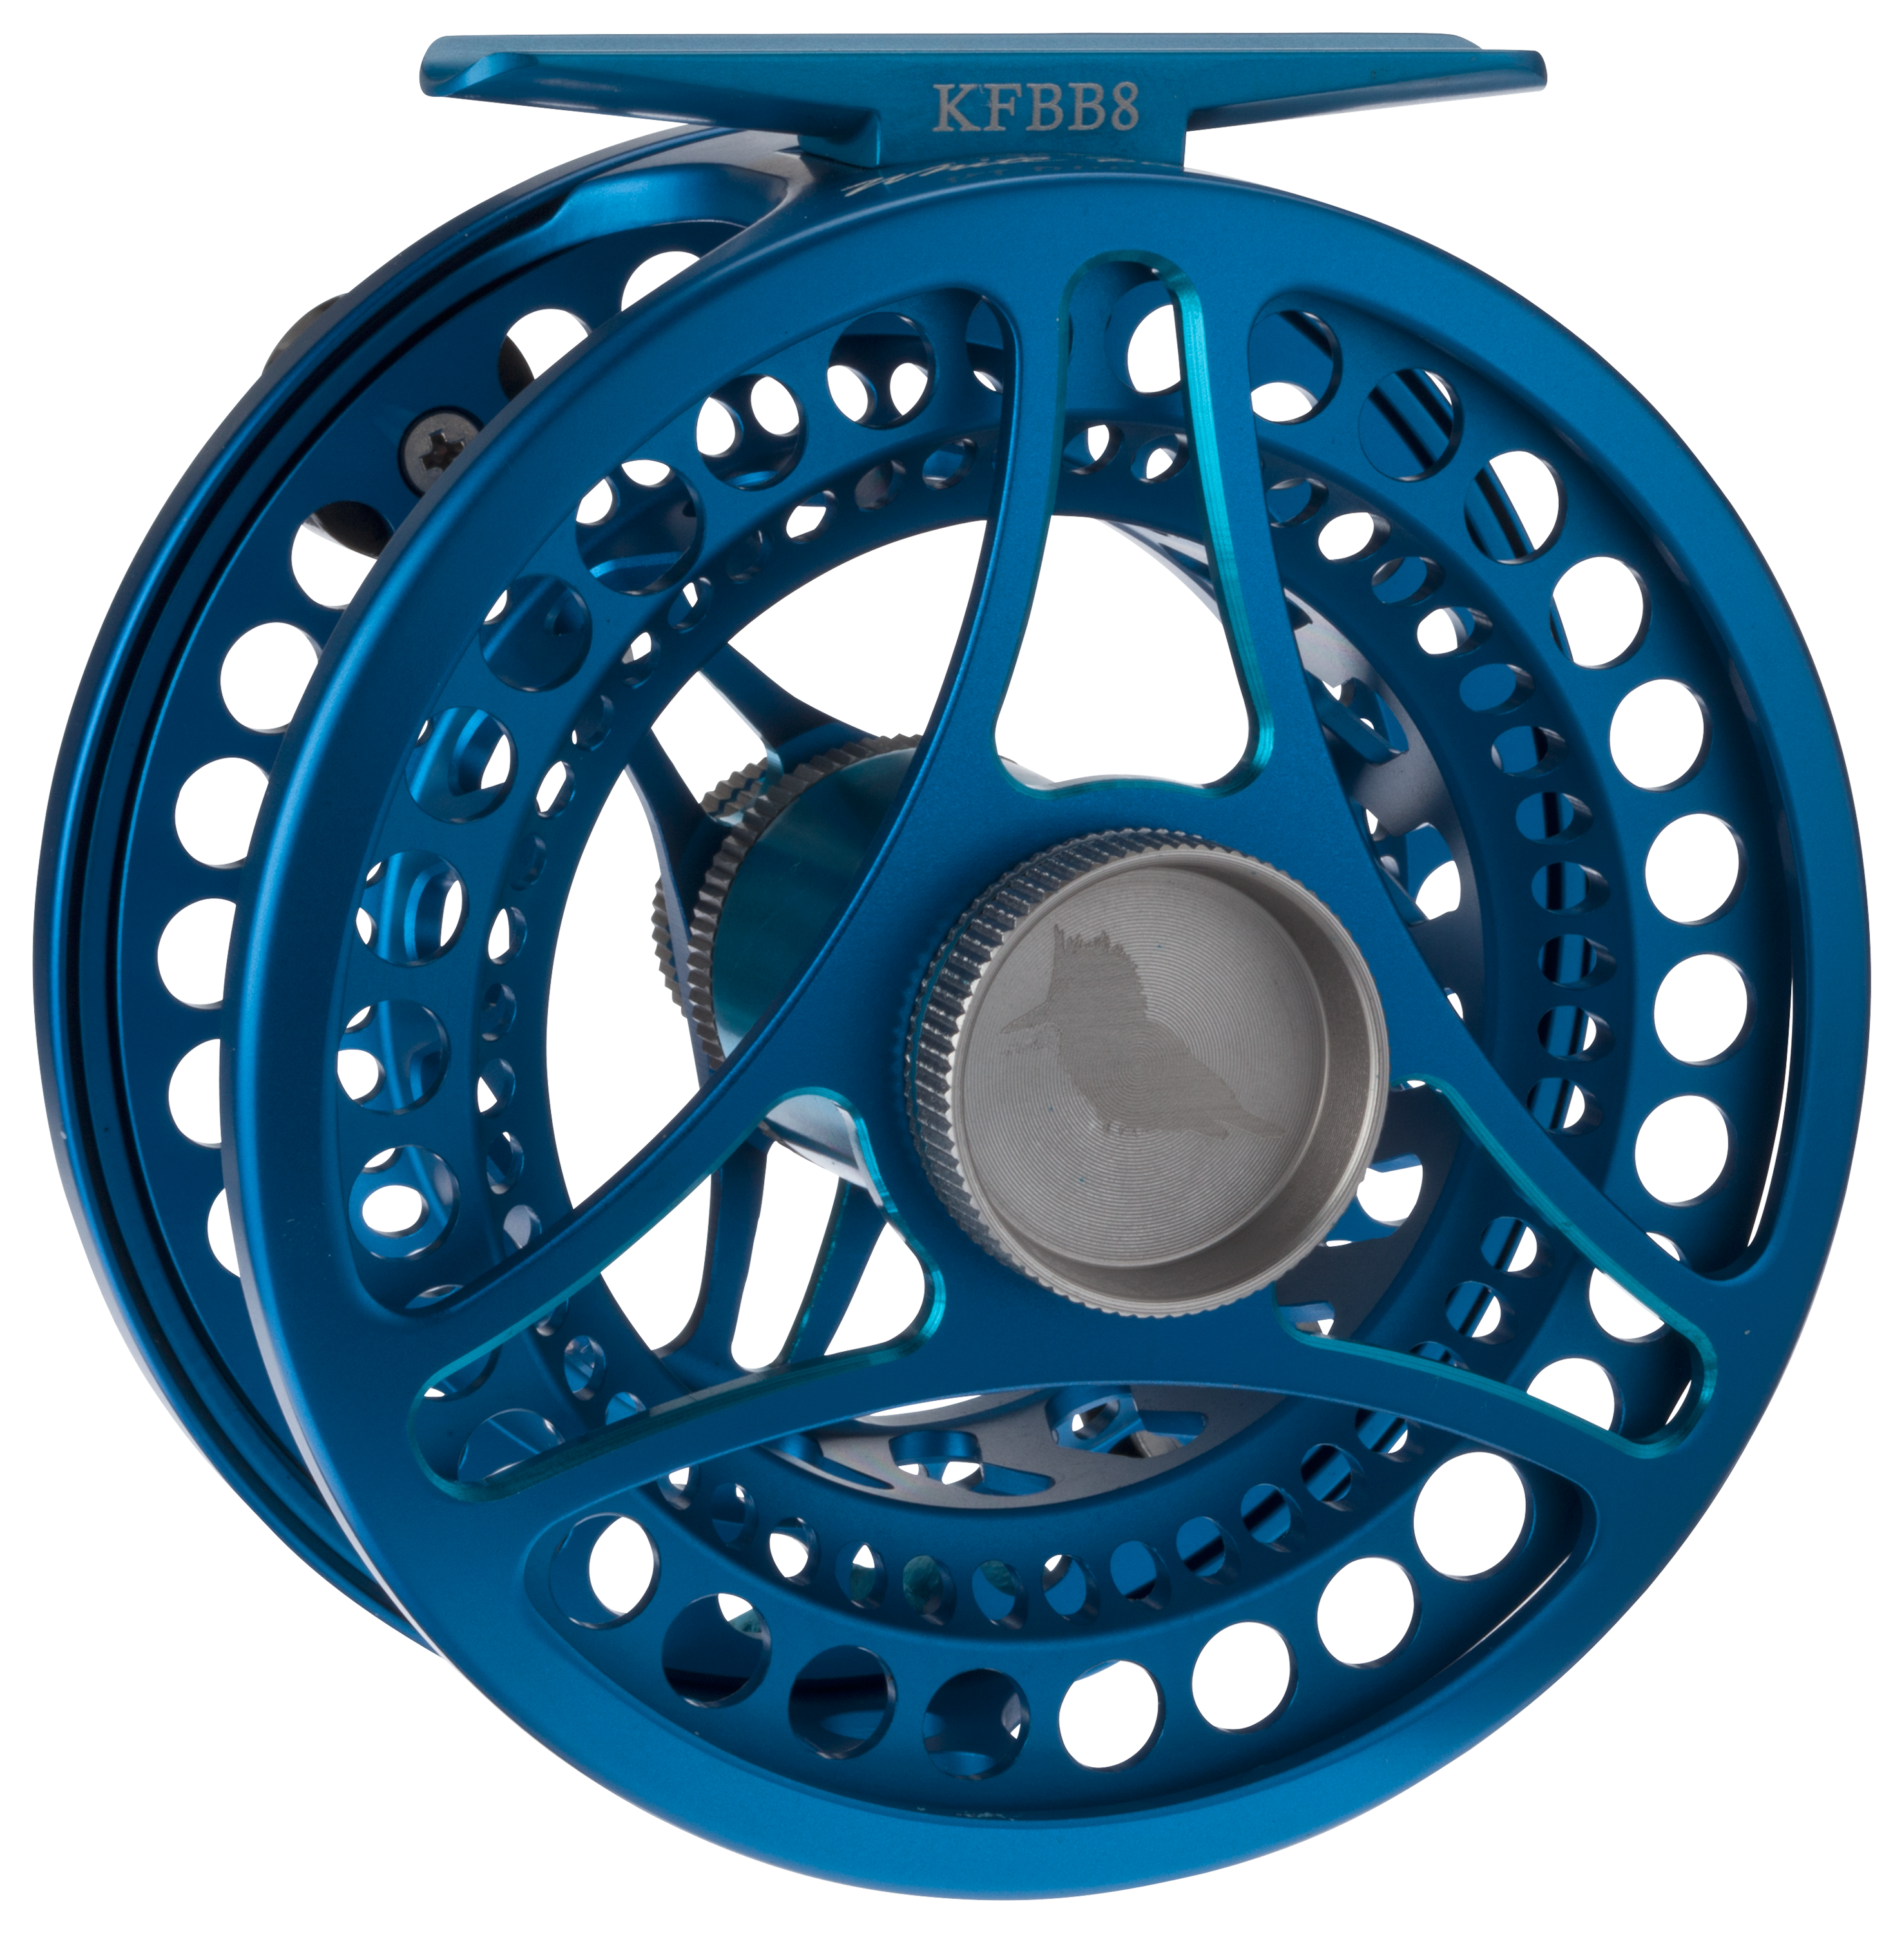 Semi-automatic fly reels & accessories